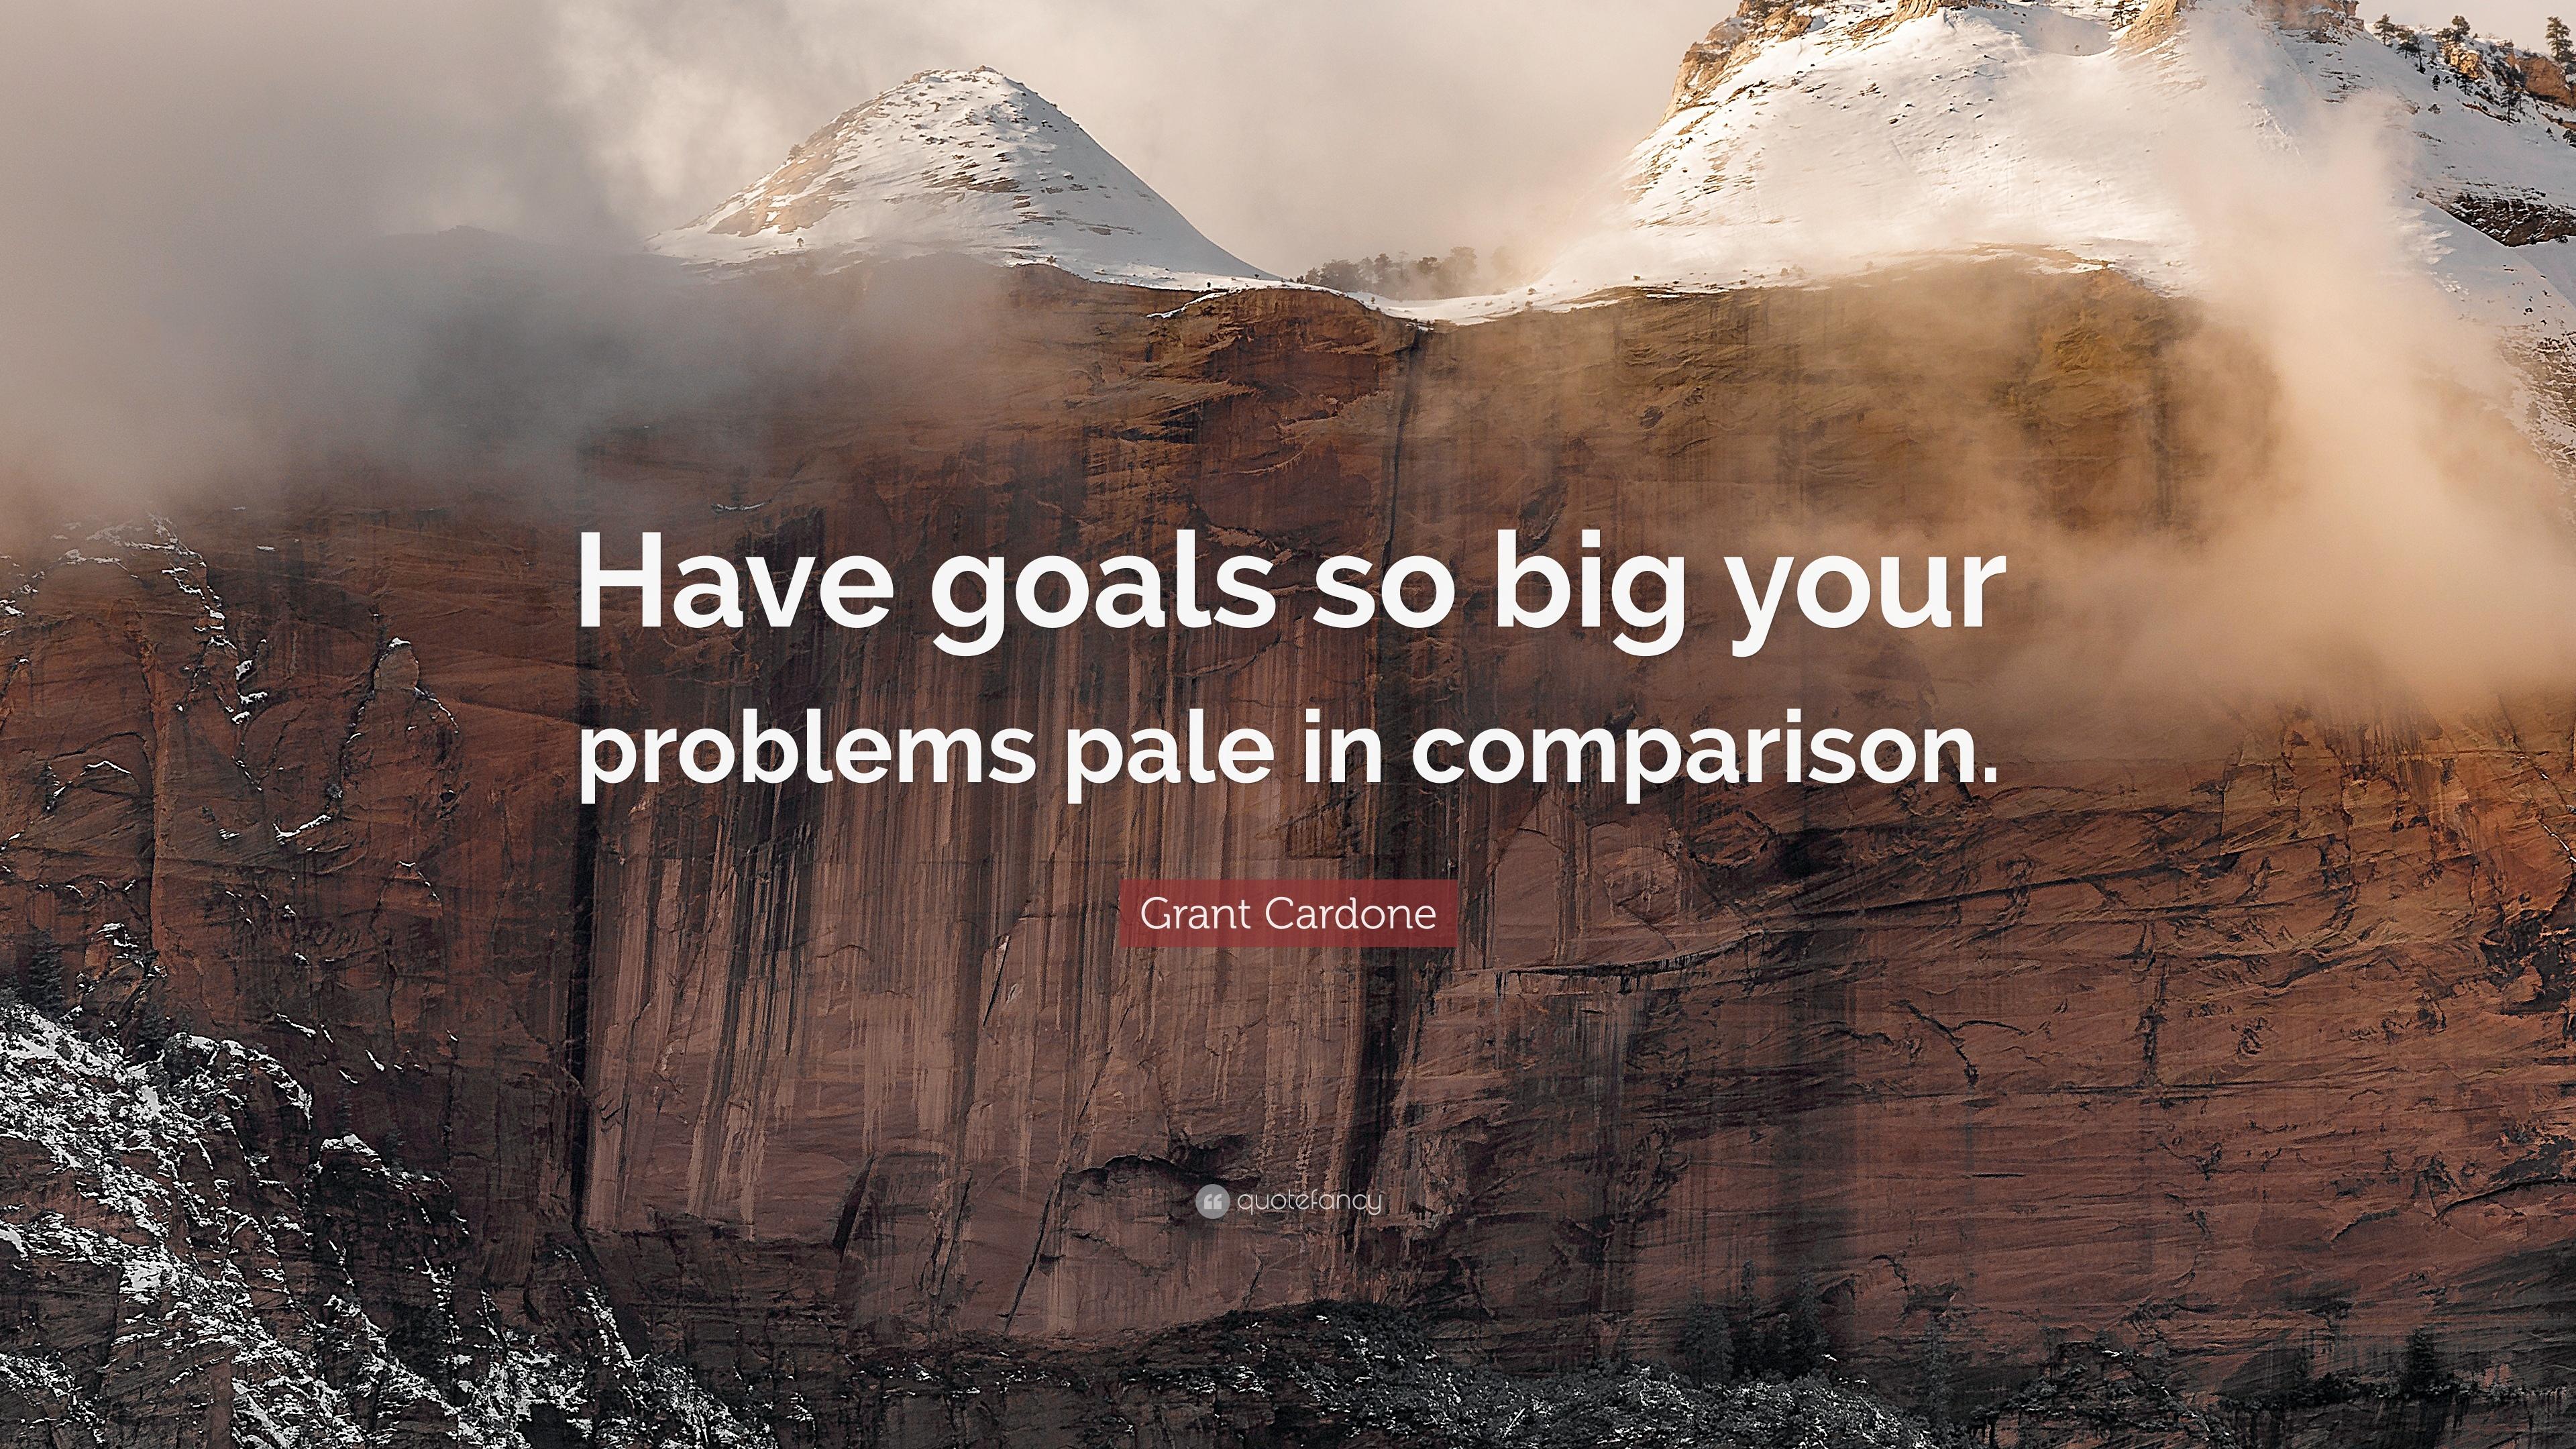 Grant Cardone Quote: “Have goals so big your problems pale